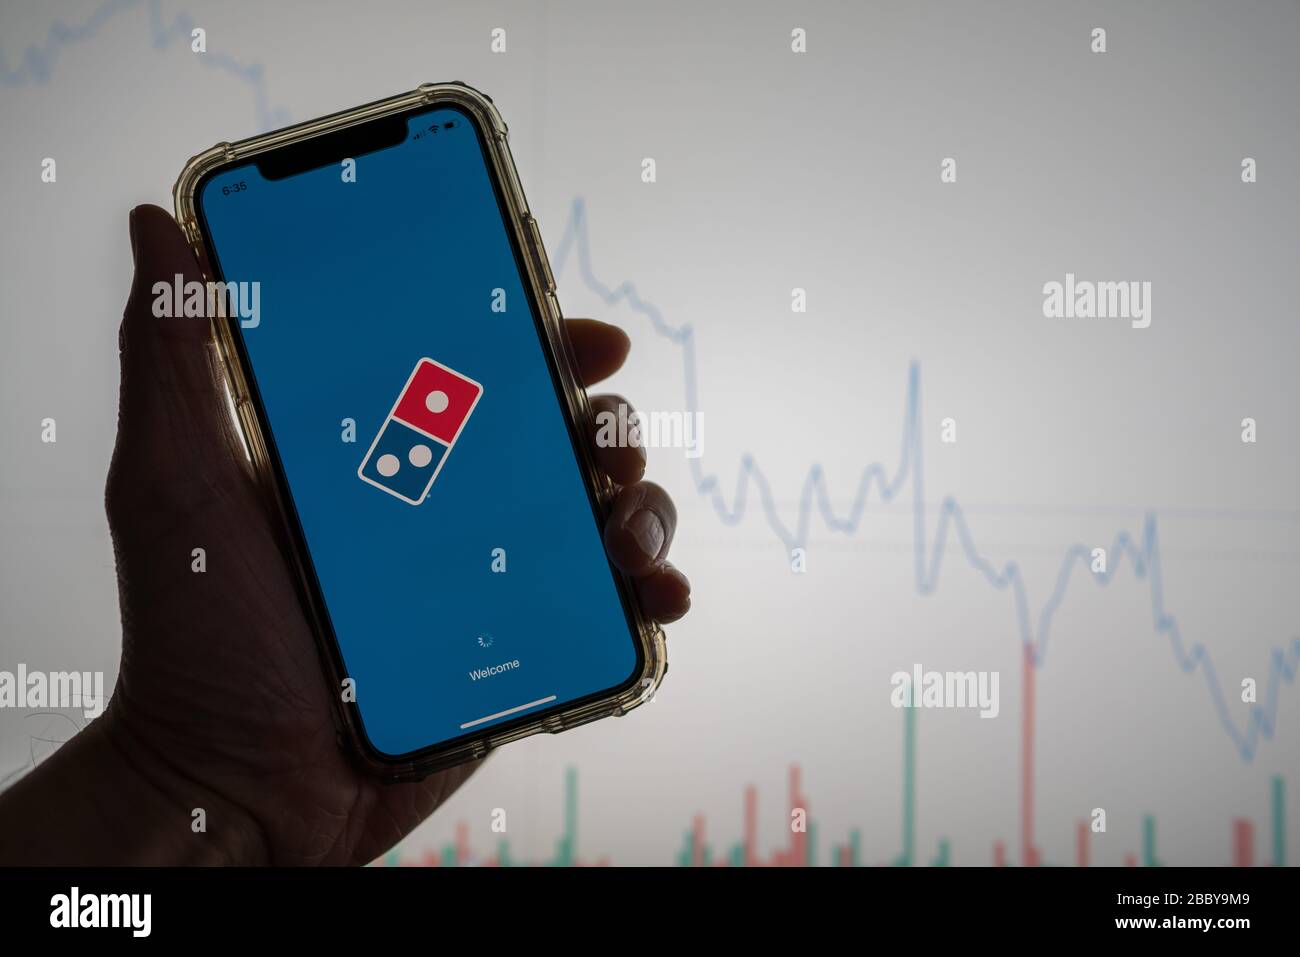 Domino s pizza mobile app held against a white stock trading chart going down in value Stock Photo